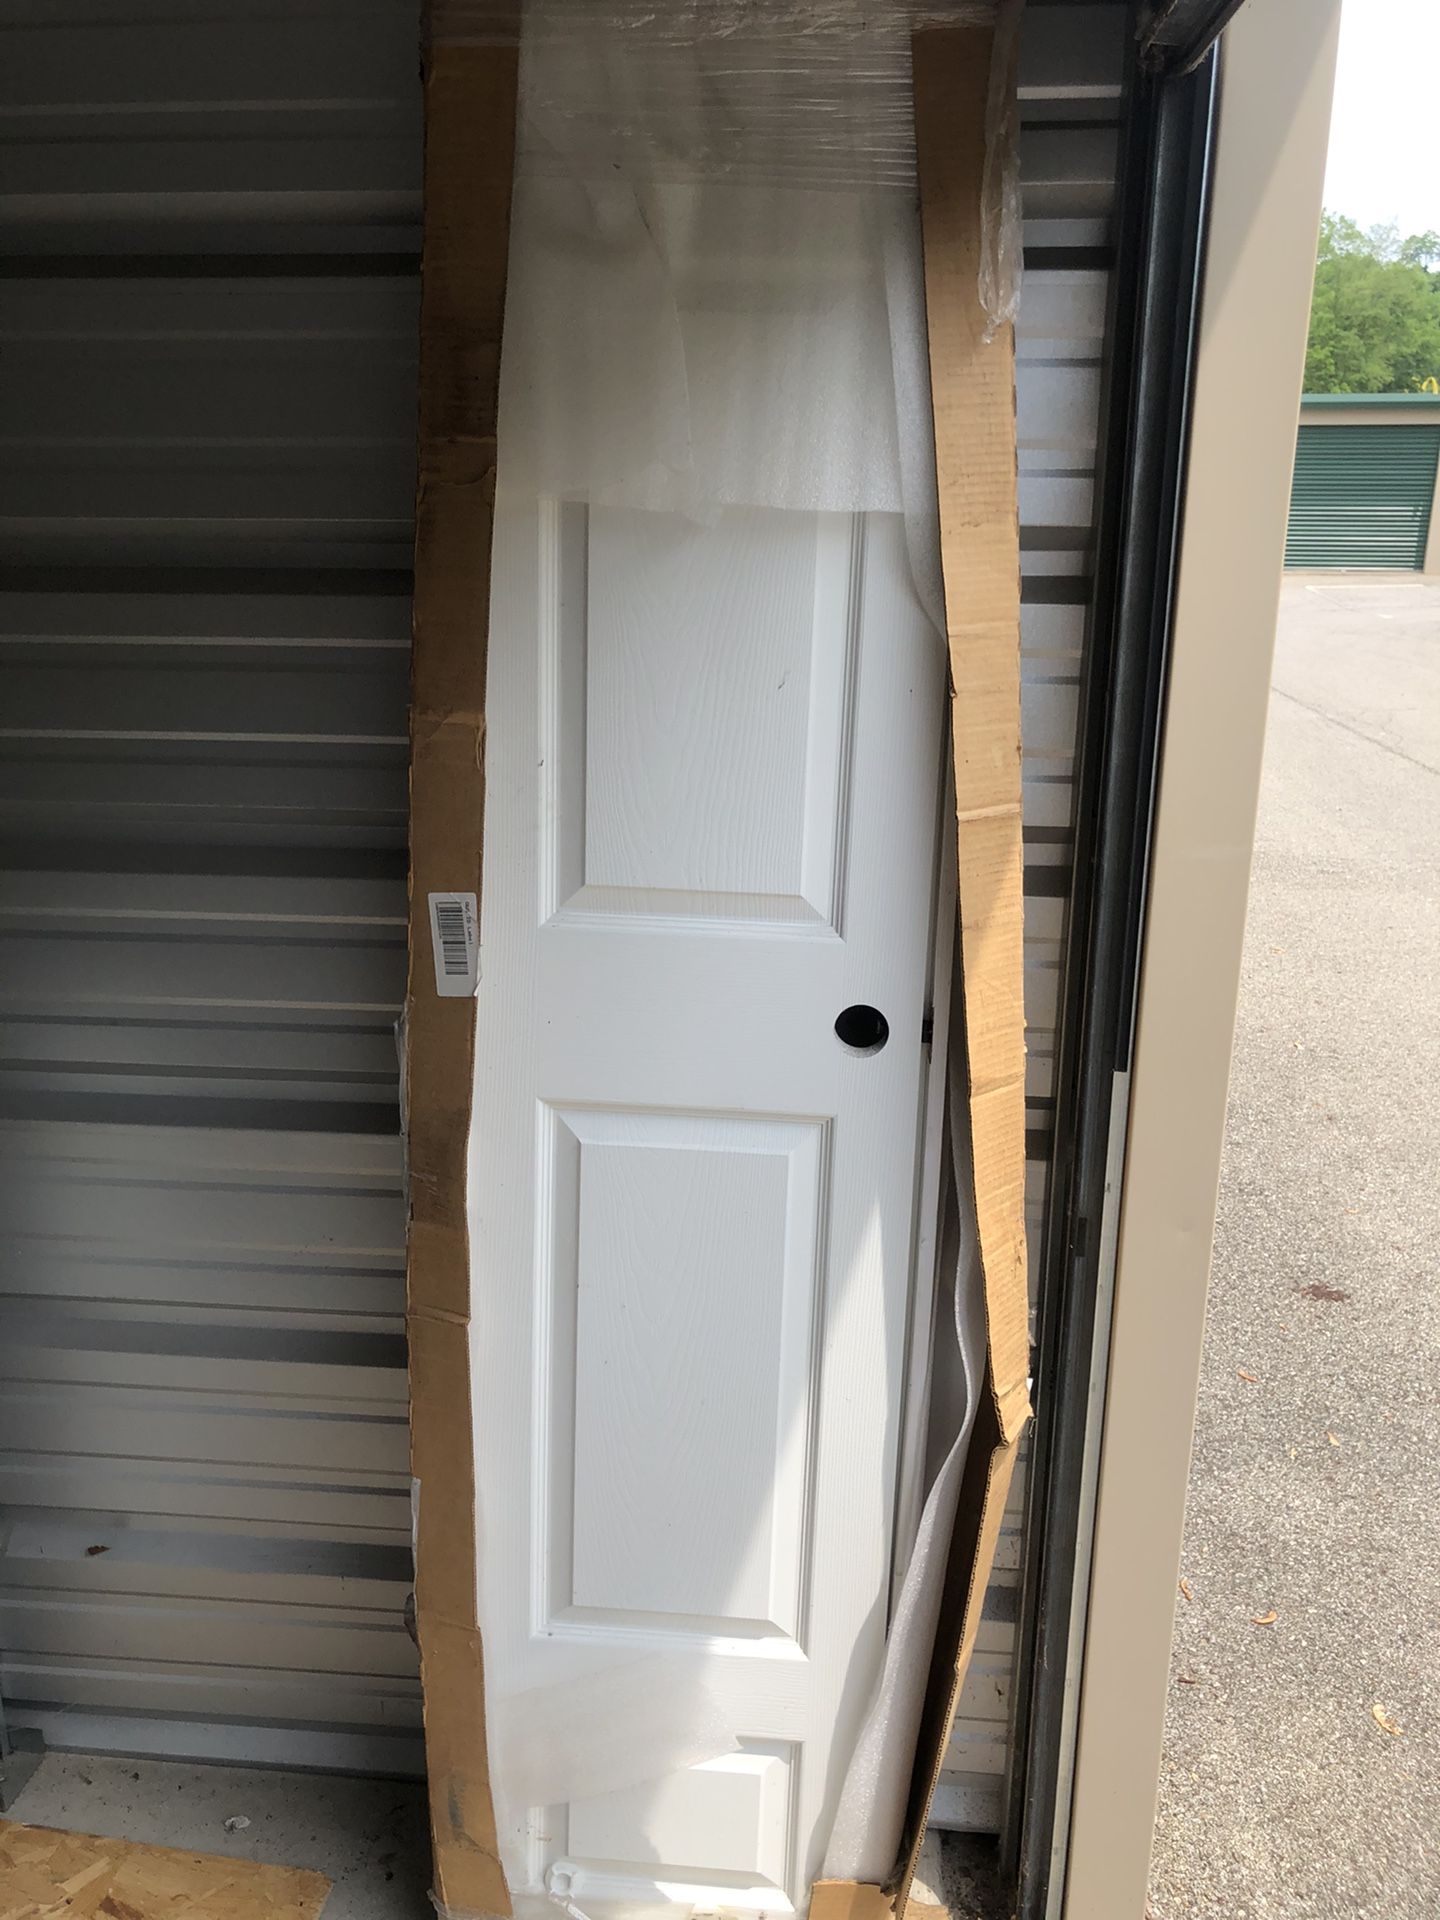 18”x 80” Colonial Primed Left-handed solid core primed molded Composite single prehung interior door . 19 7/8 wide 4 1/2”deep 82 1/2” tall with Frame